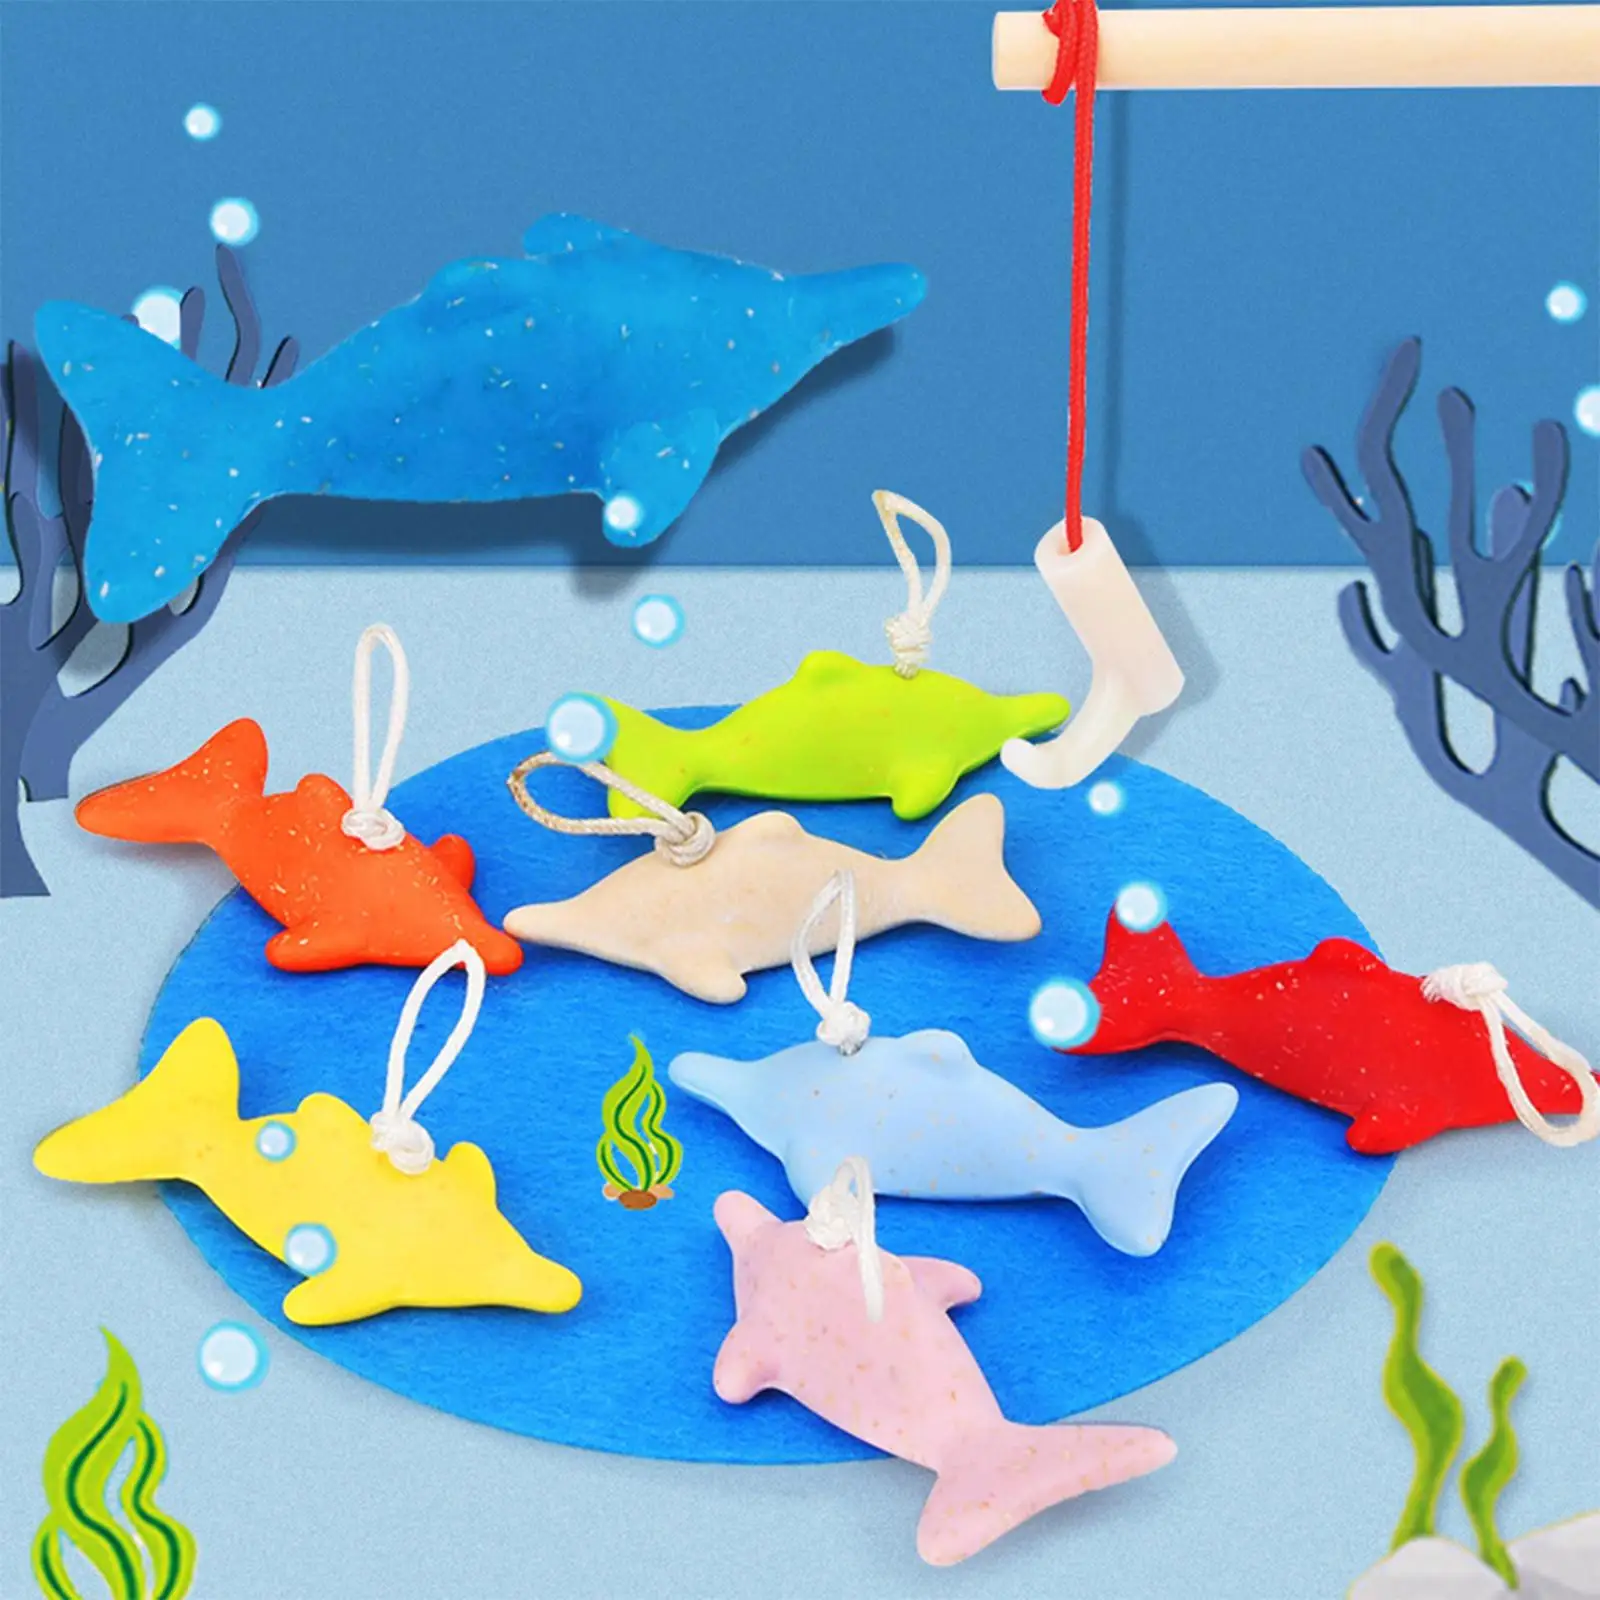 Wood Fishing Game Toy Set with 10 Fish & 2 Fishing Pole Pretend Play Fishing